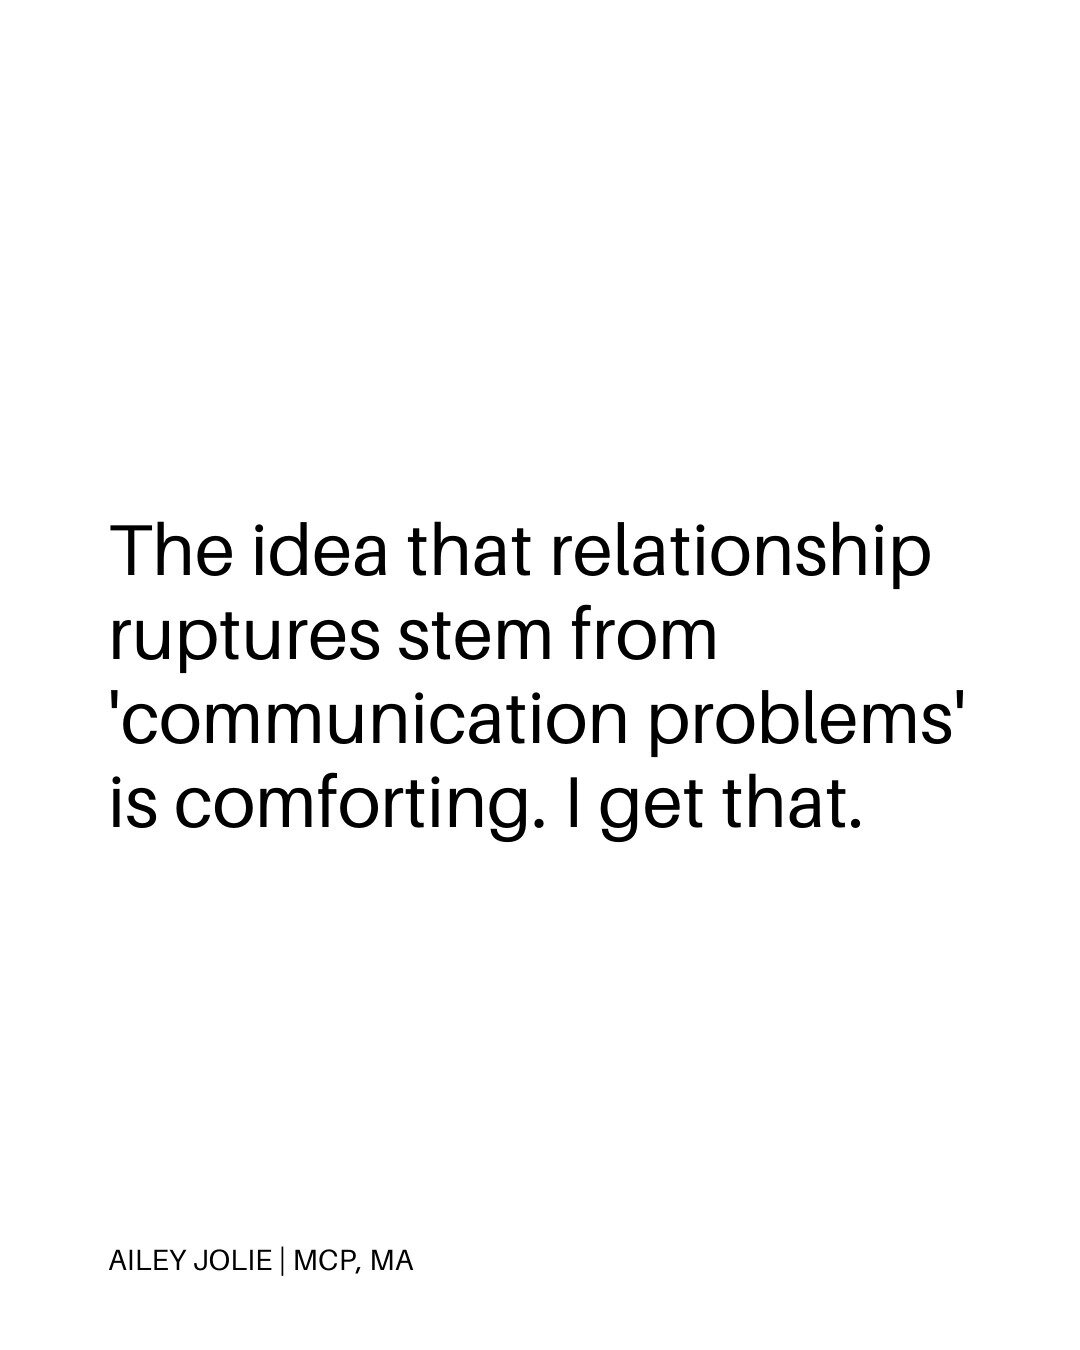 The idea that relationship ruptures stem from 'communication problems' is comforting. I get that. 

Thinking you can &ldquo;talk it out&rdquo; is soothing to so many people because it suggests a clear pathway back to harmony.

However, there is no cl